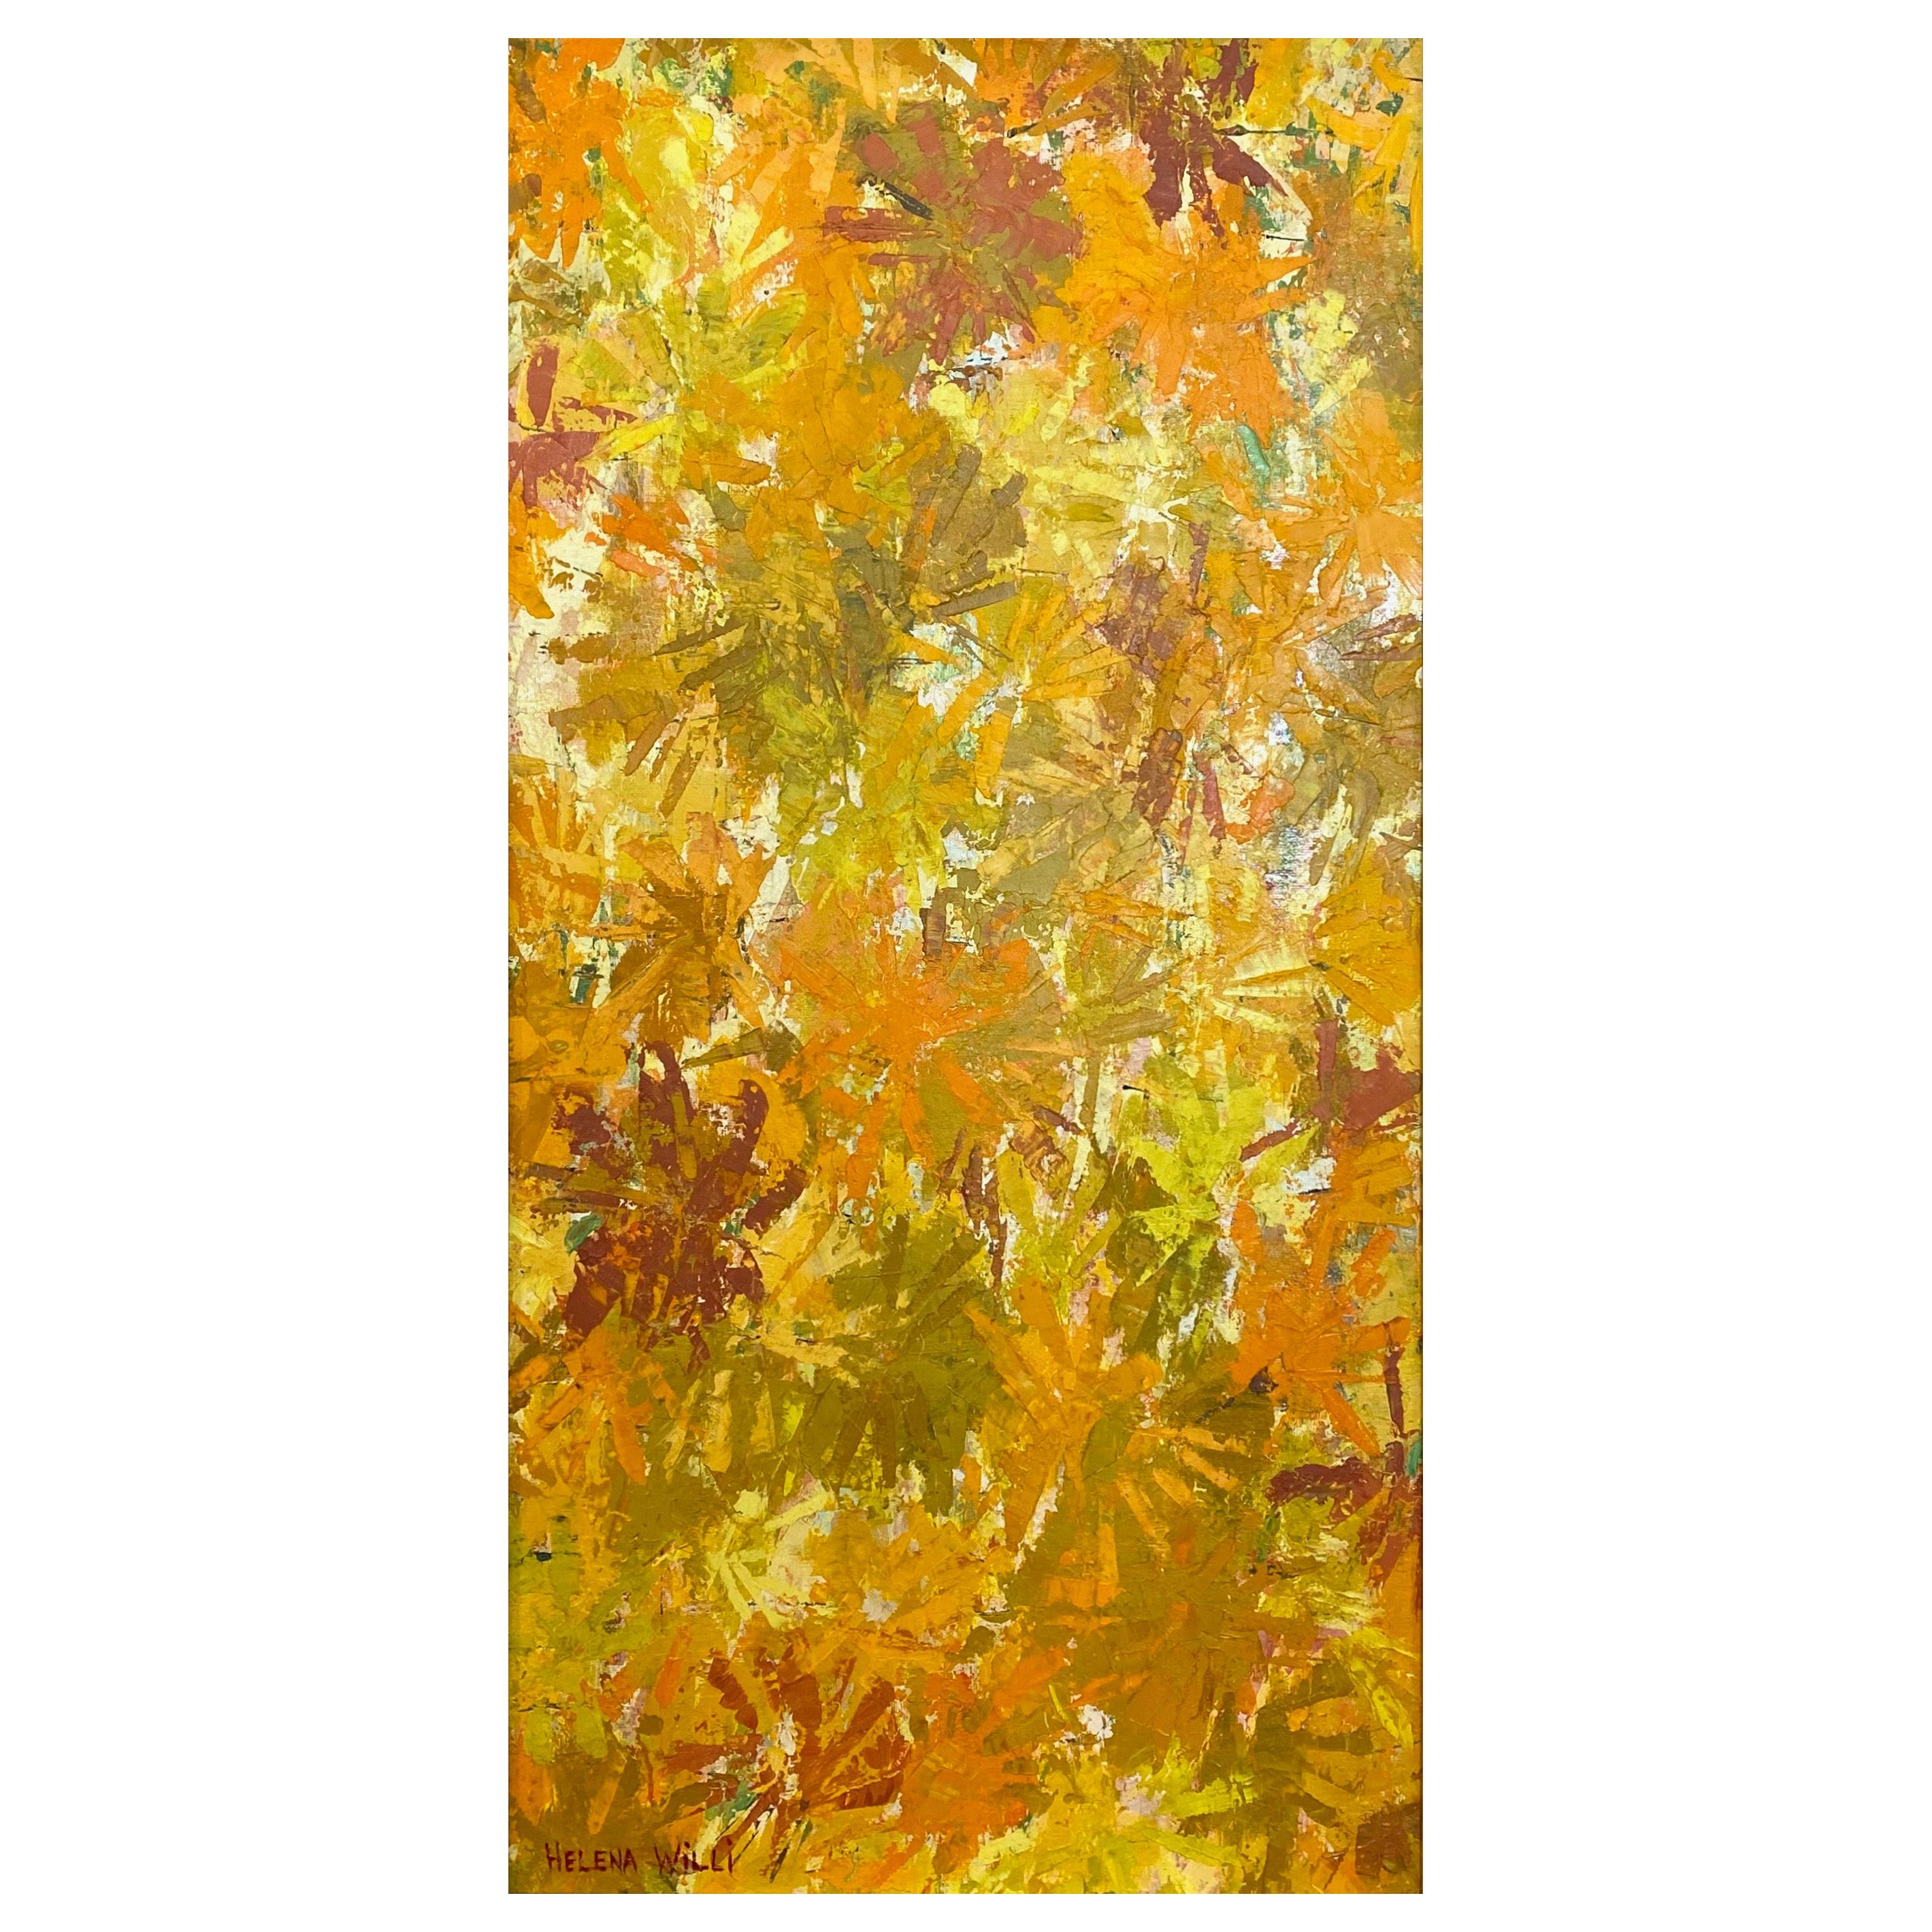 Helena Willi “Autumn”, Expressionist Flora Oil Painting, c. 1960